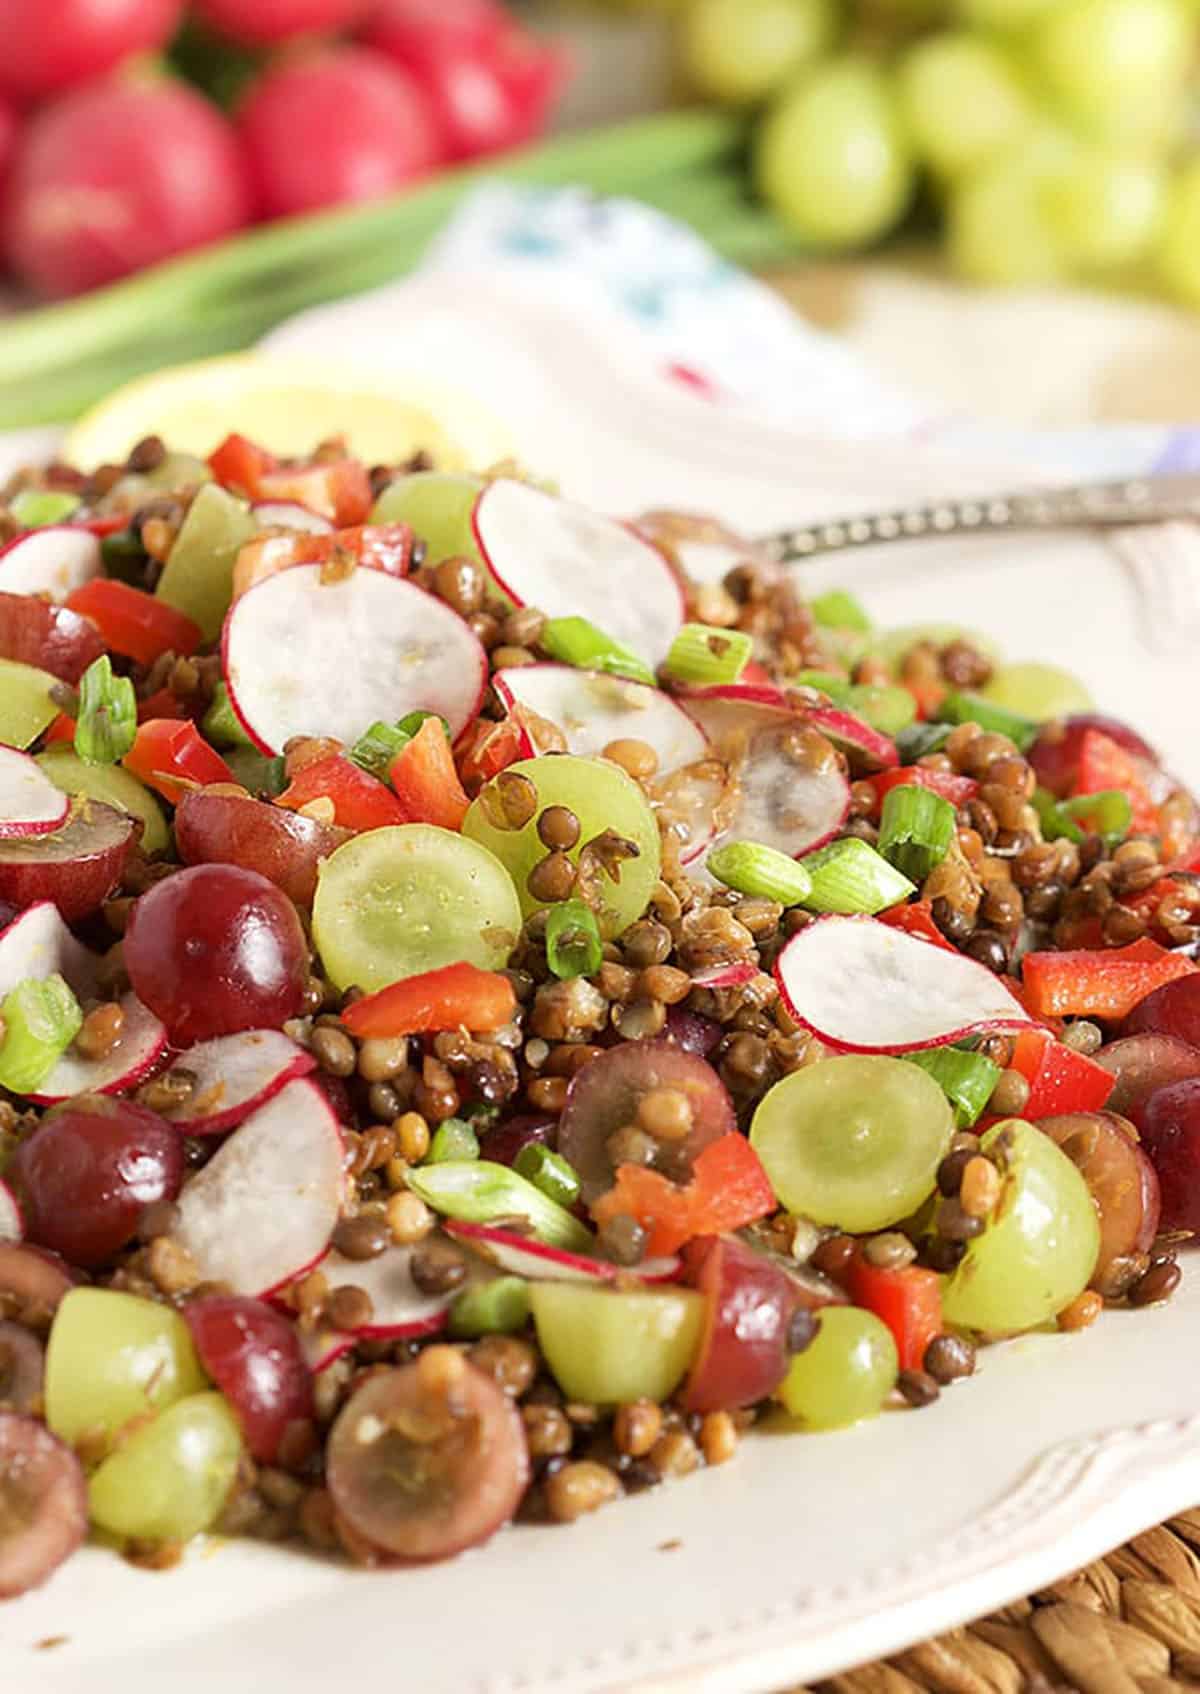 Lentil Salad with grapes and radishes on a white platter with a silver serving spoon.